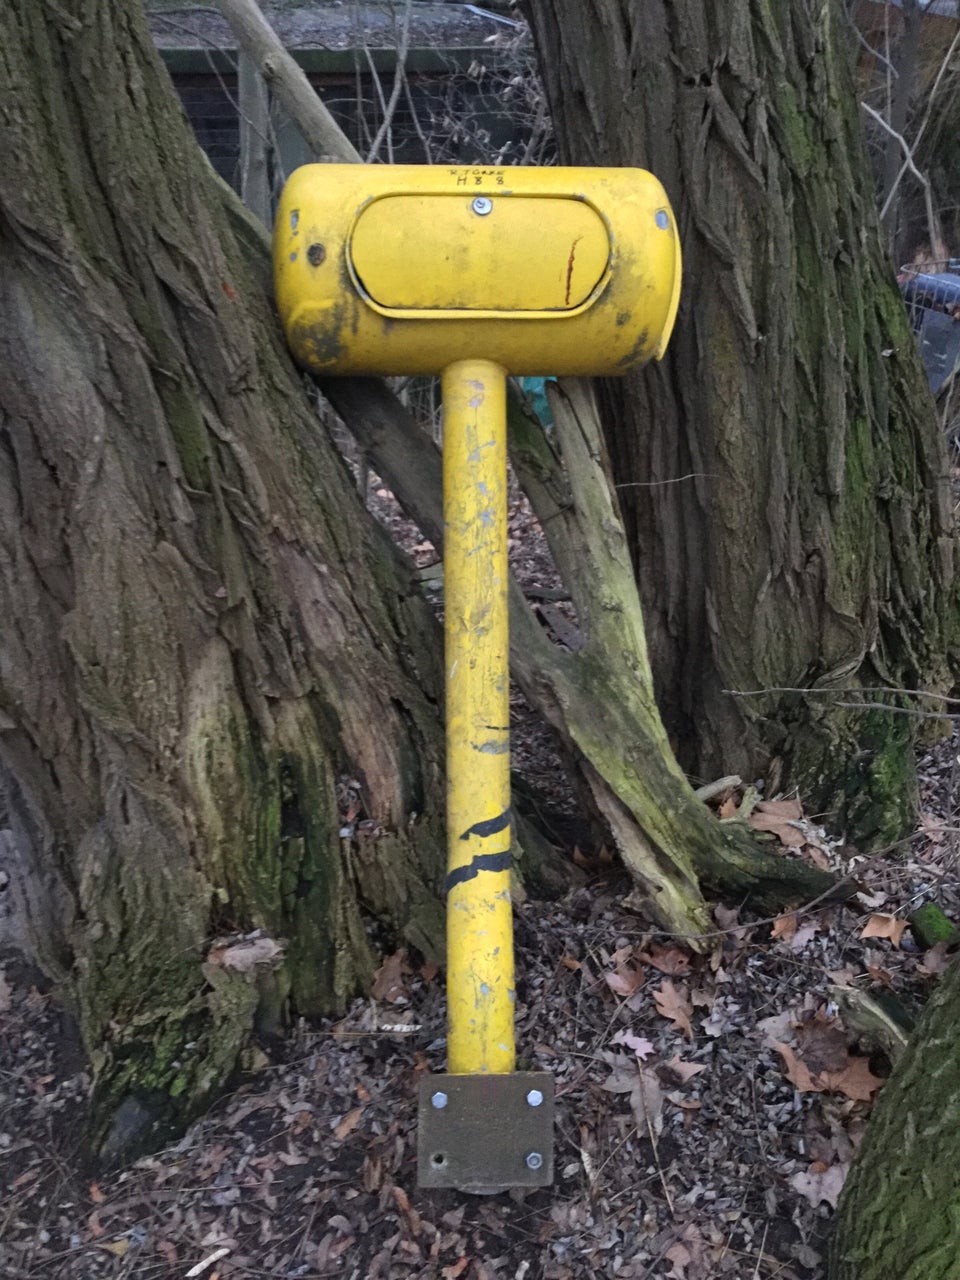 Giant yellow mallet thing leaned up against a tree.